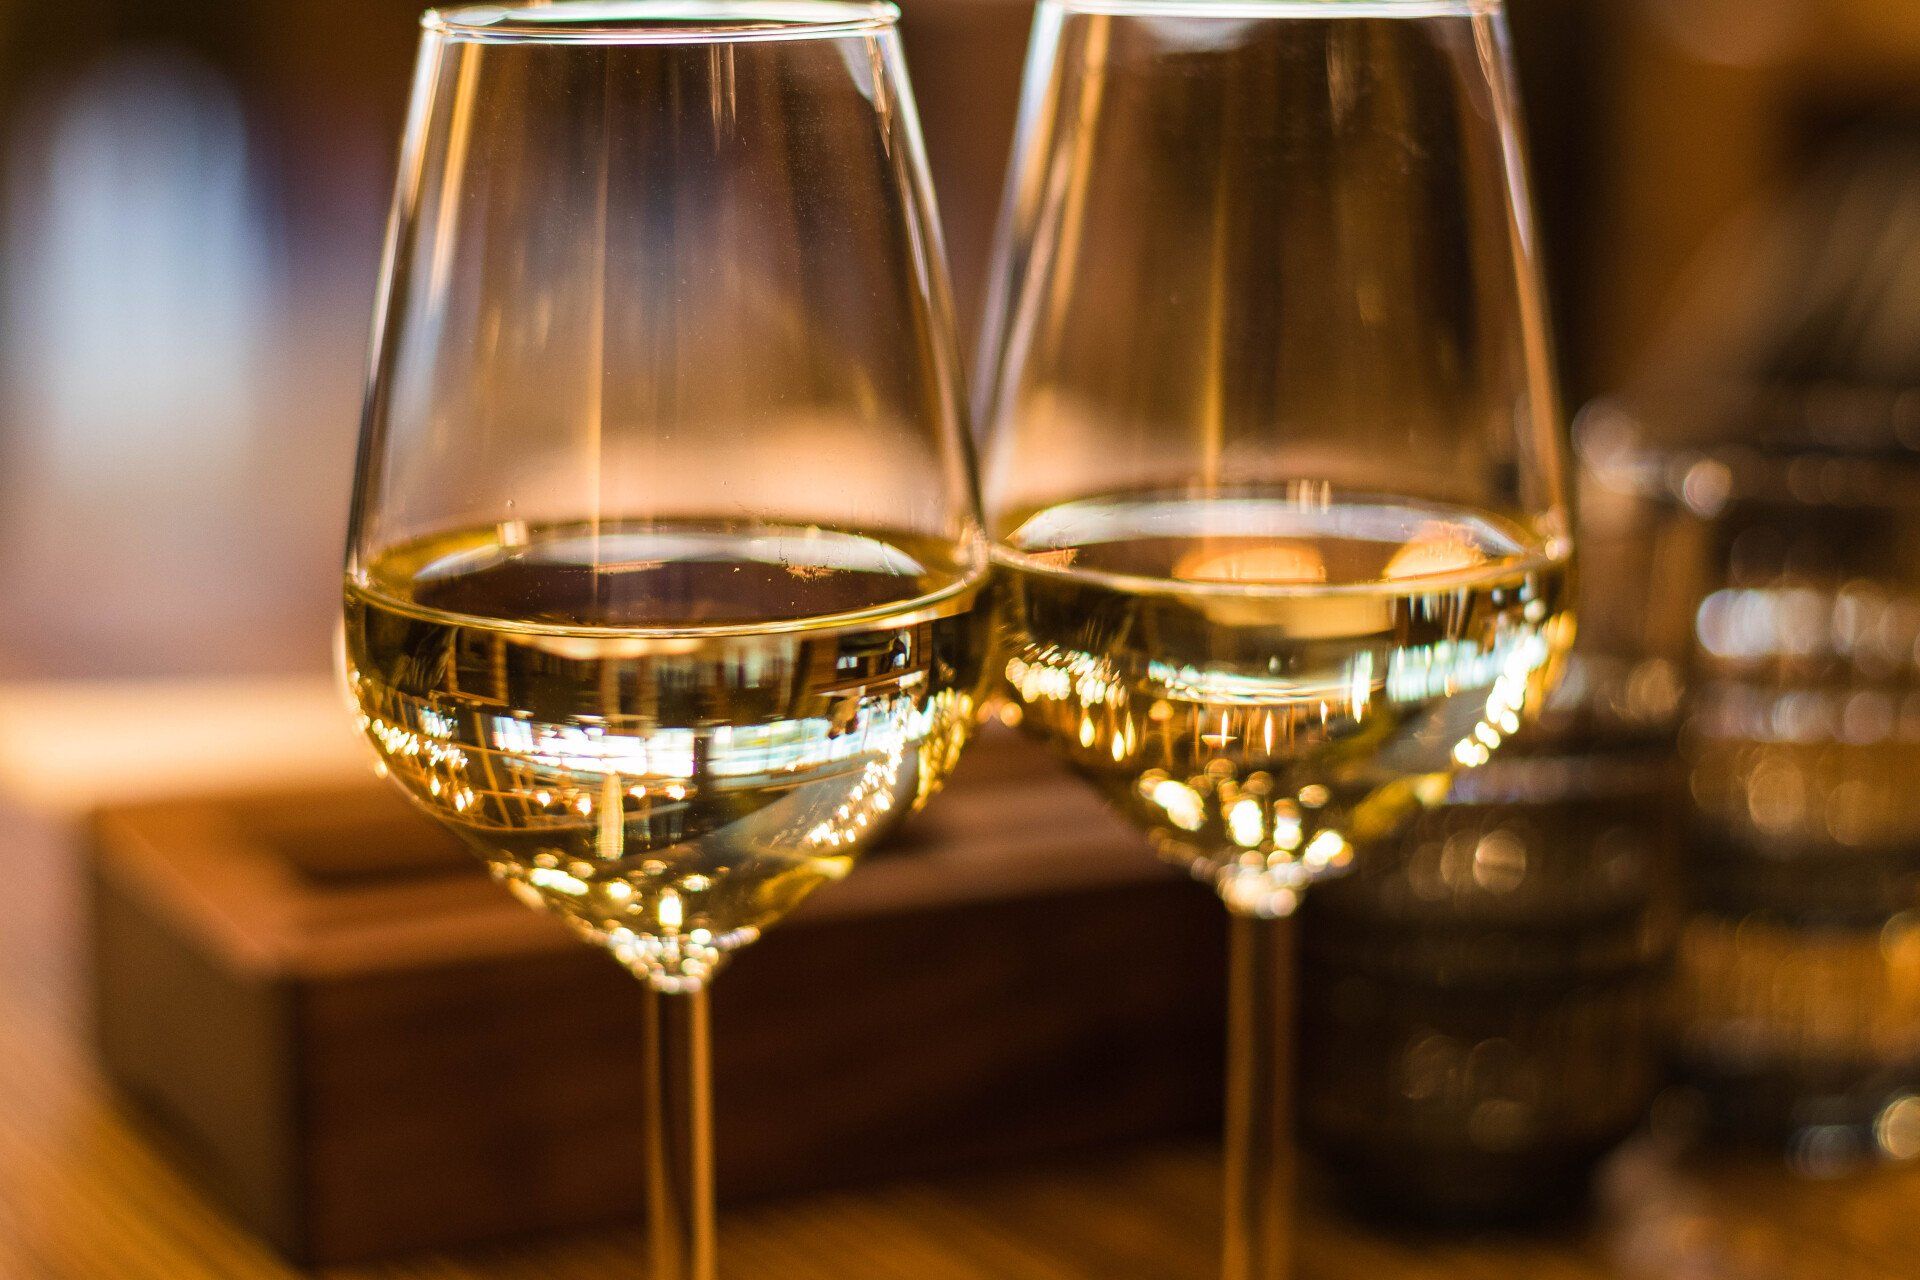 picure of two glasses with white wine in them